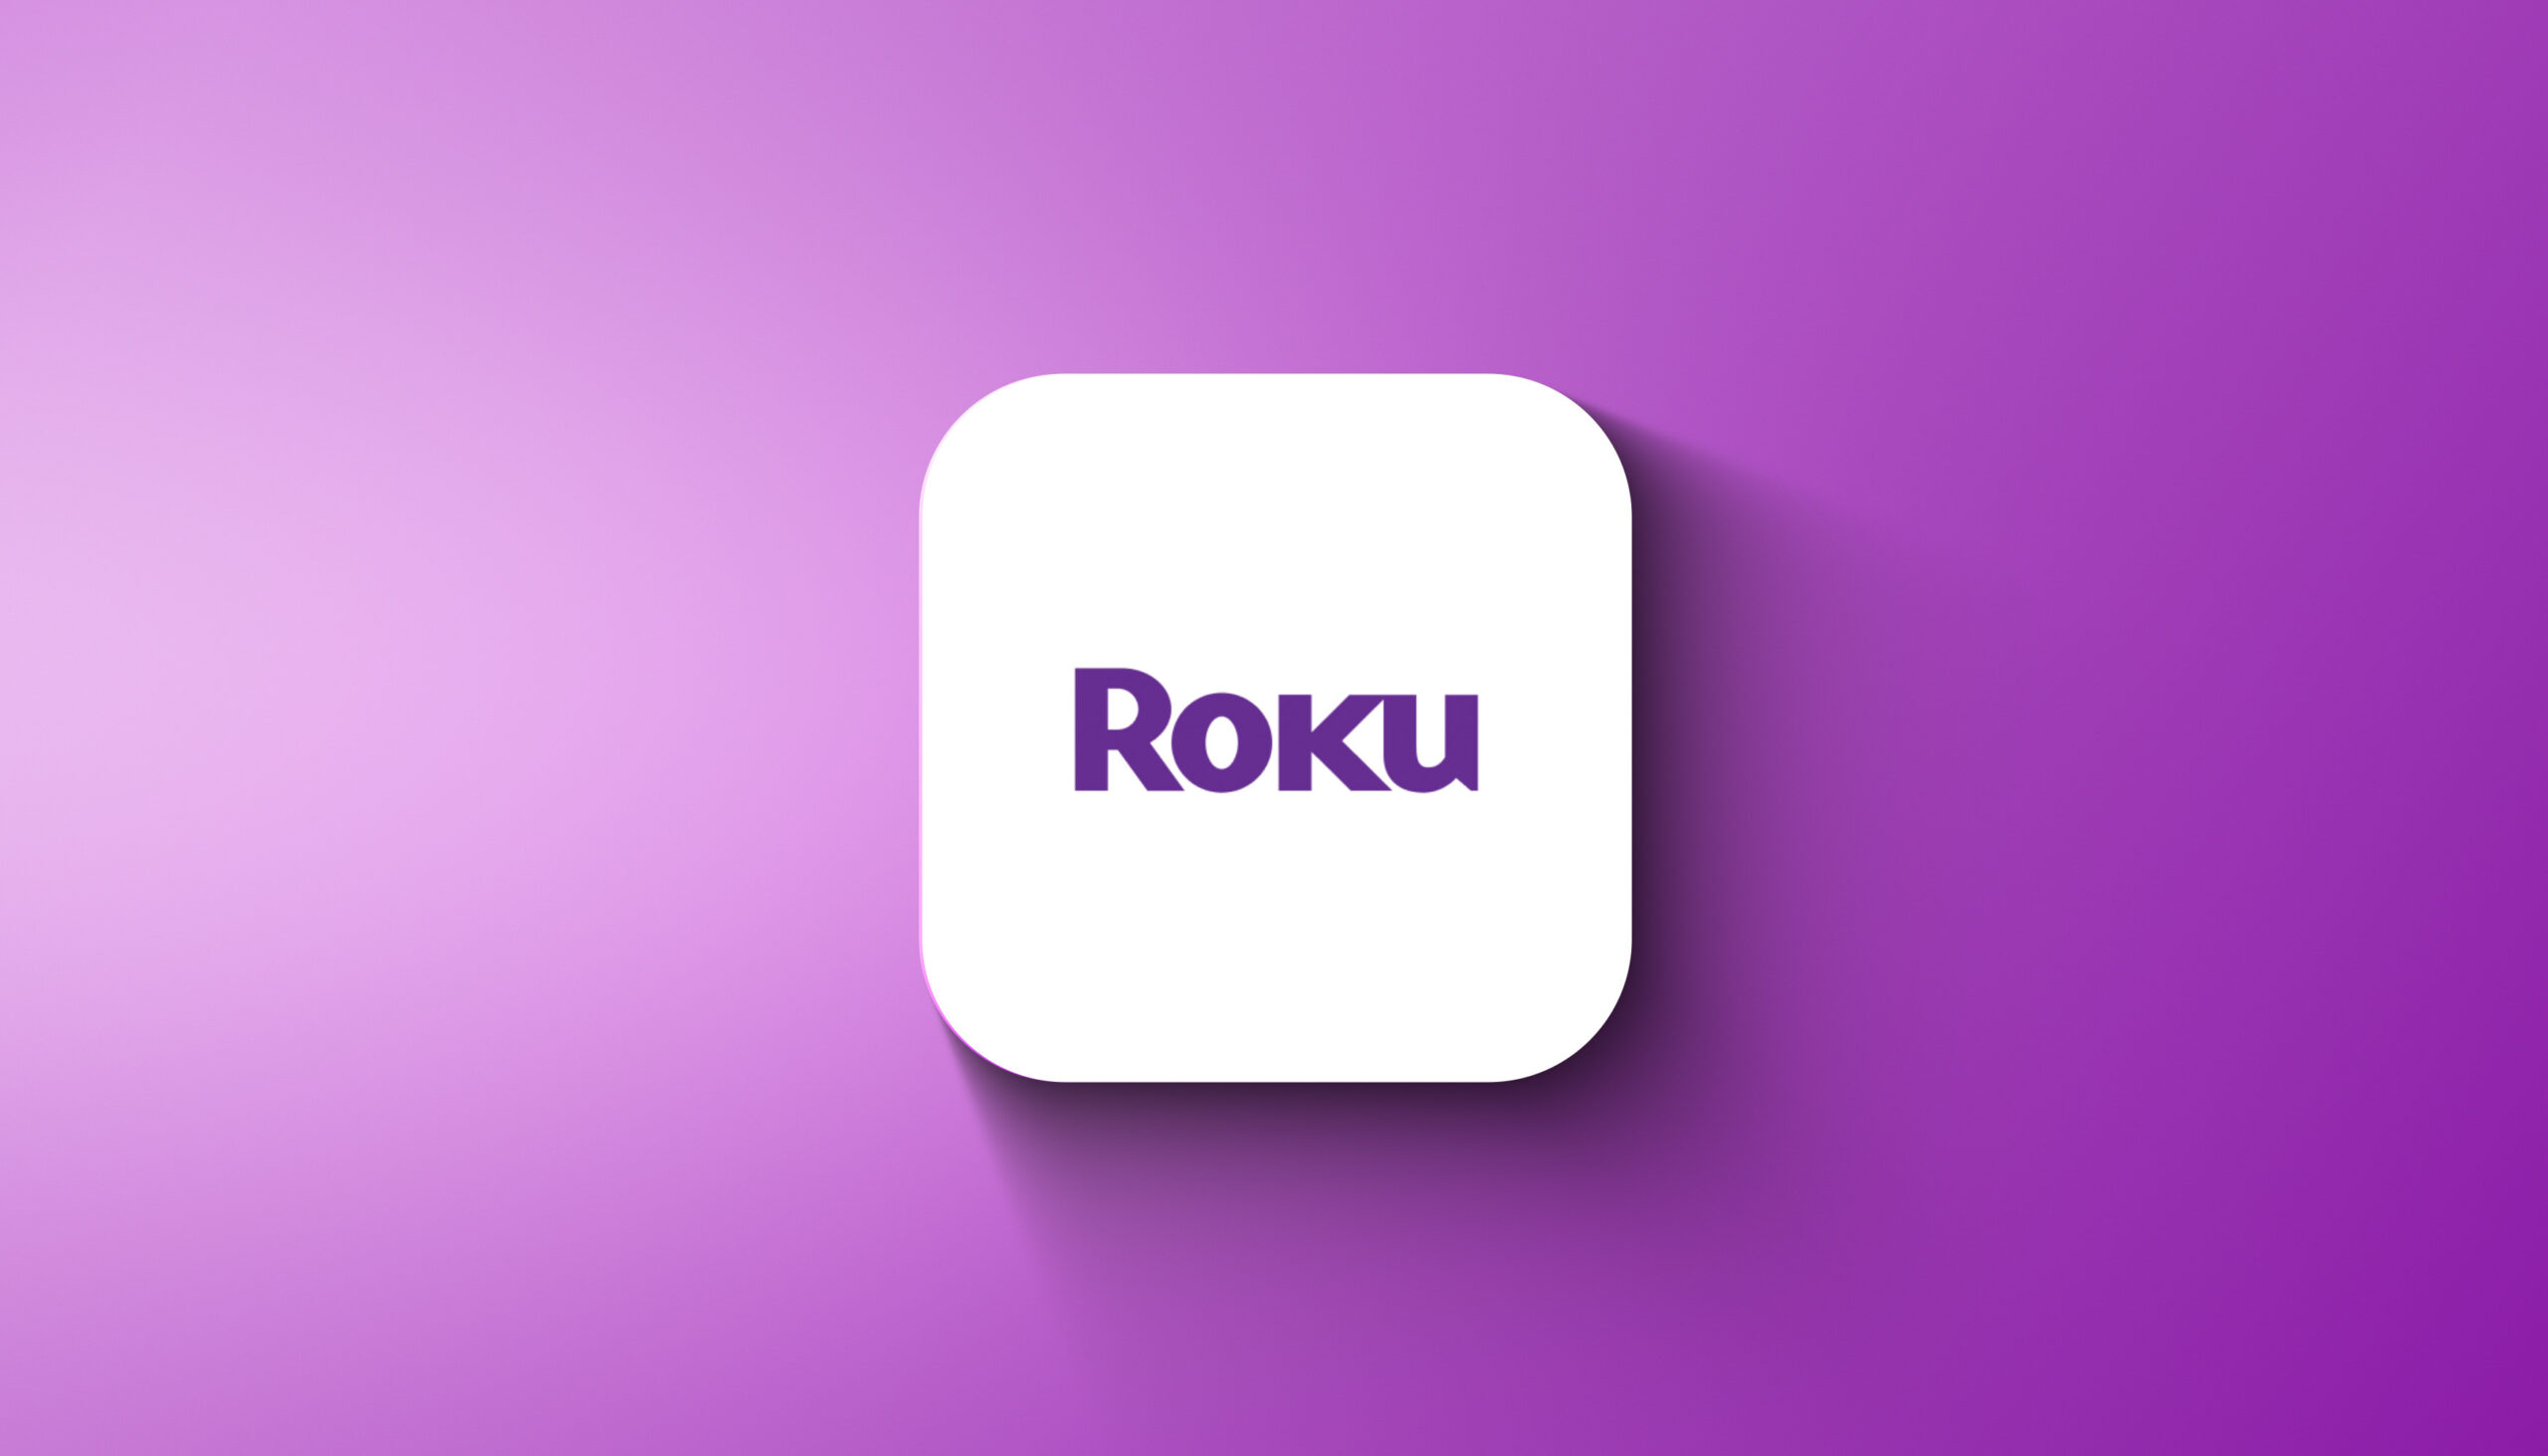 The Roku Logo in a Gradient Background